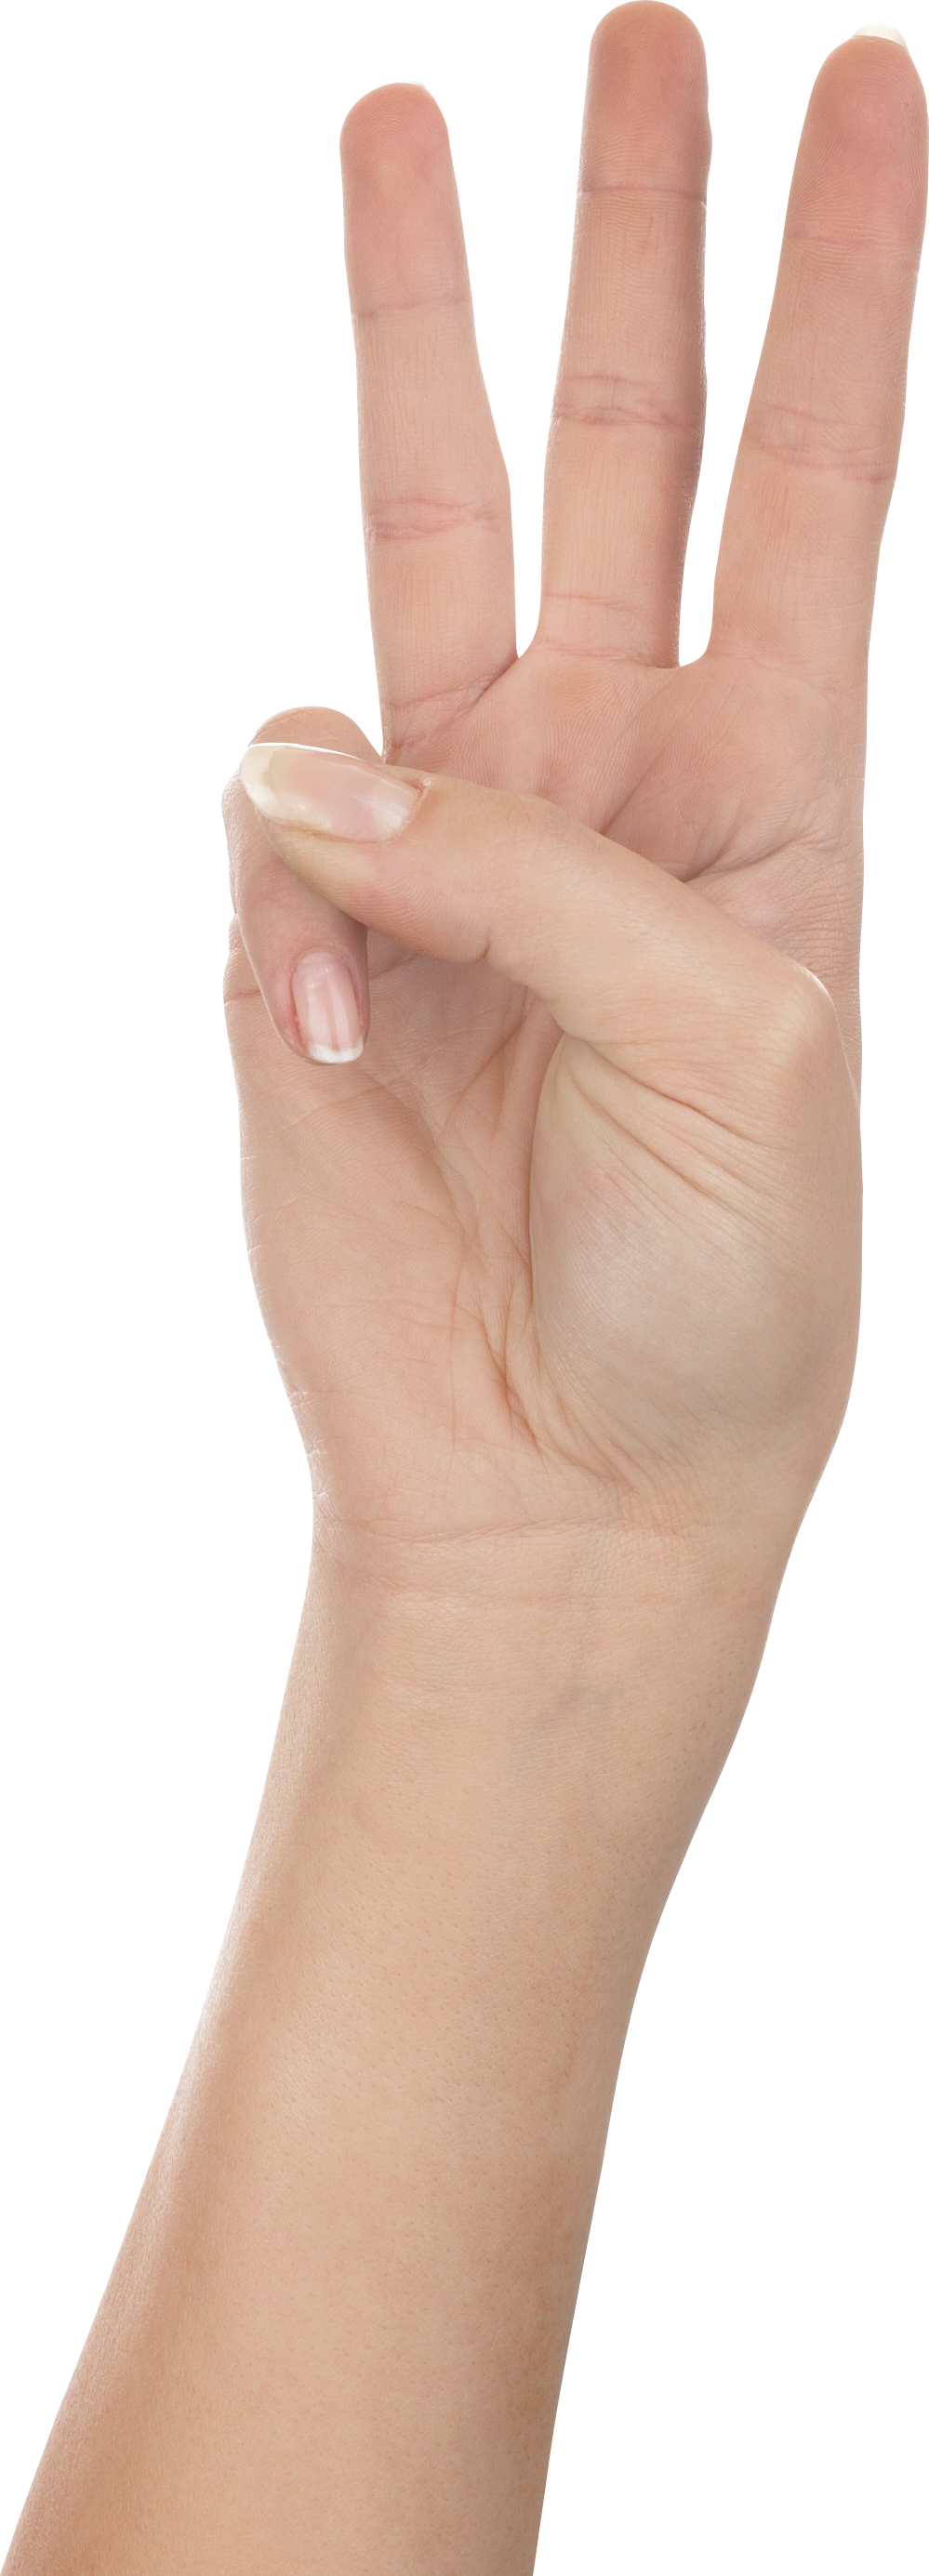 Nail clipart womens hand. Hands png free images